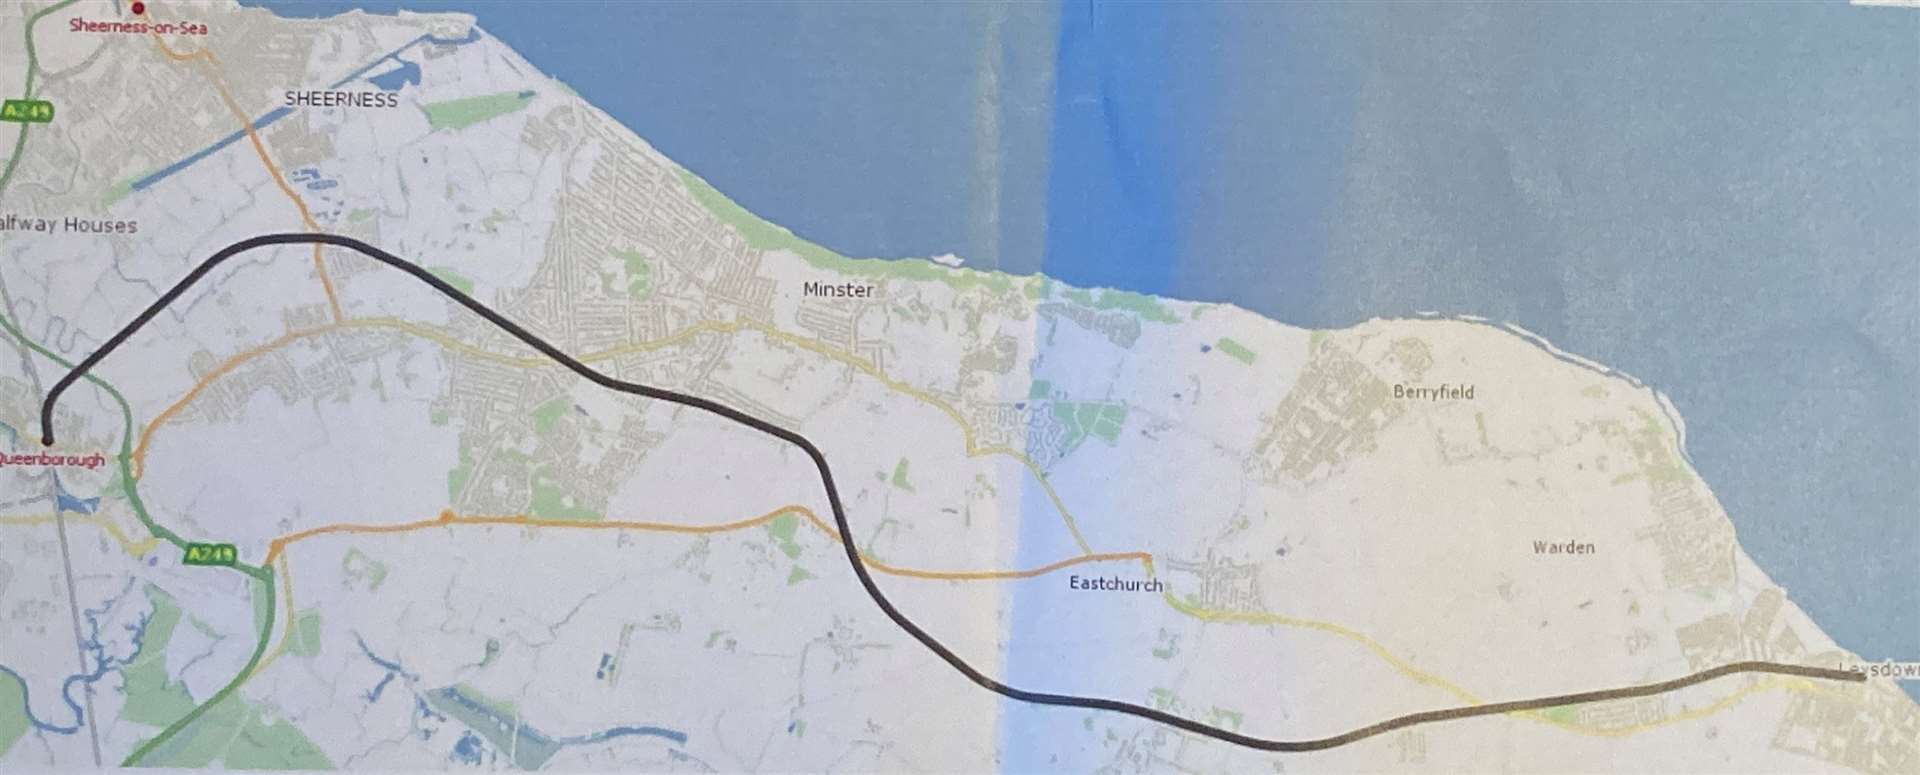 The original route of the Sheppey Light Railway whihc went from Queenborough to Leysdown. Now it could become part of a 'greenway' for cyclists and walkers (60183207)